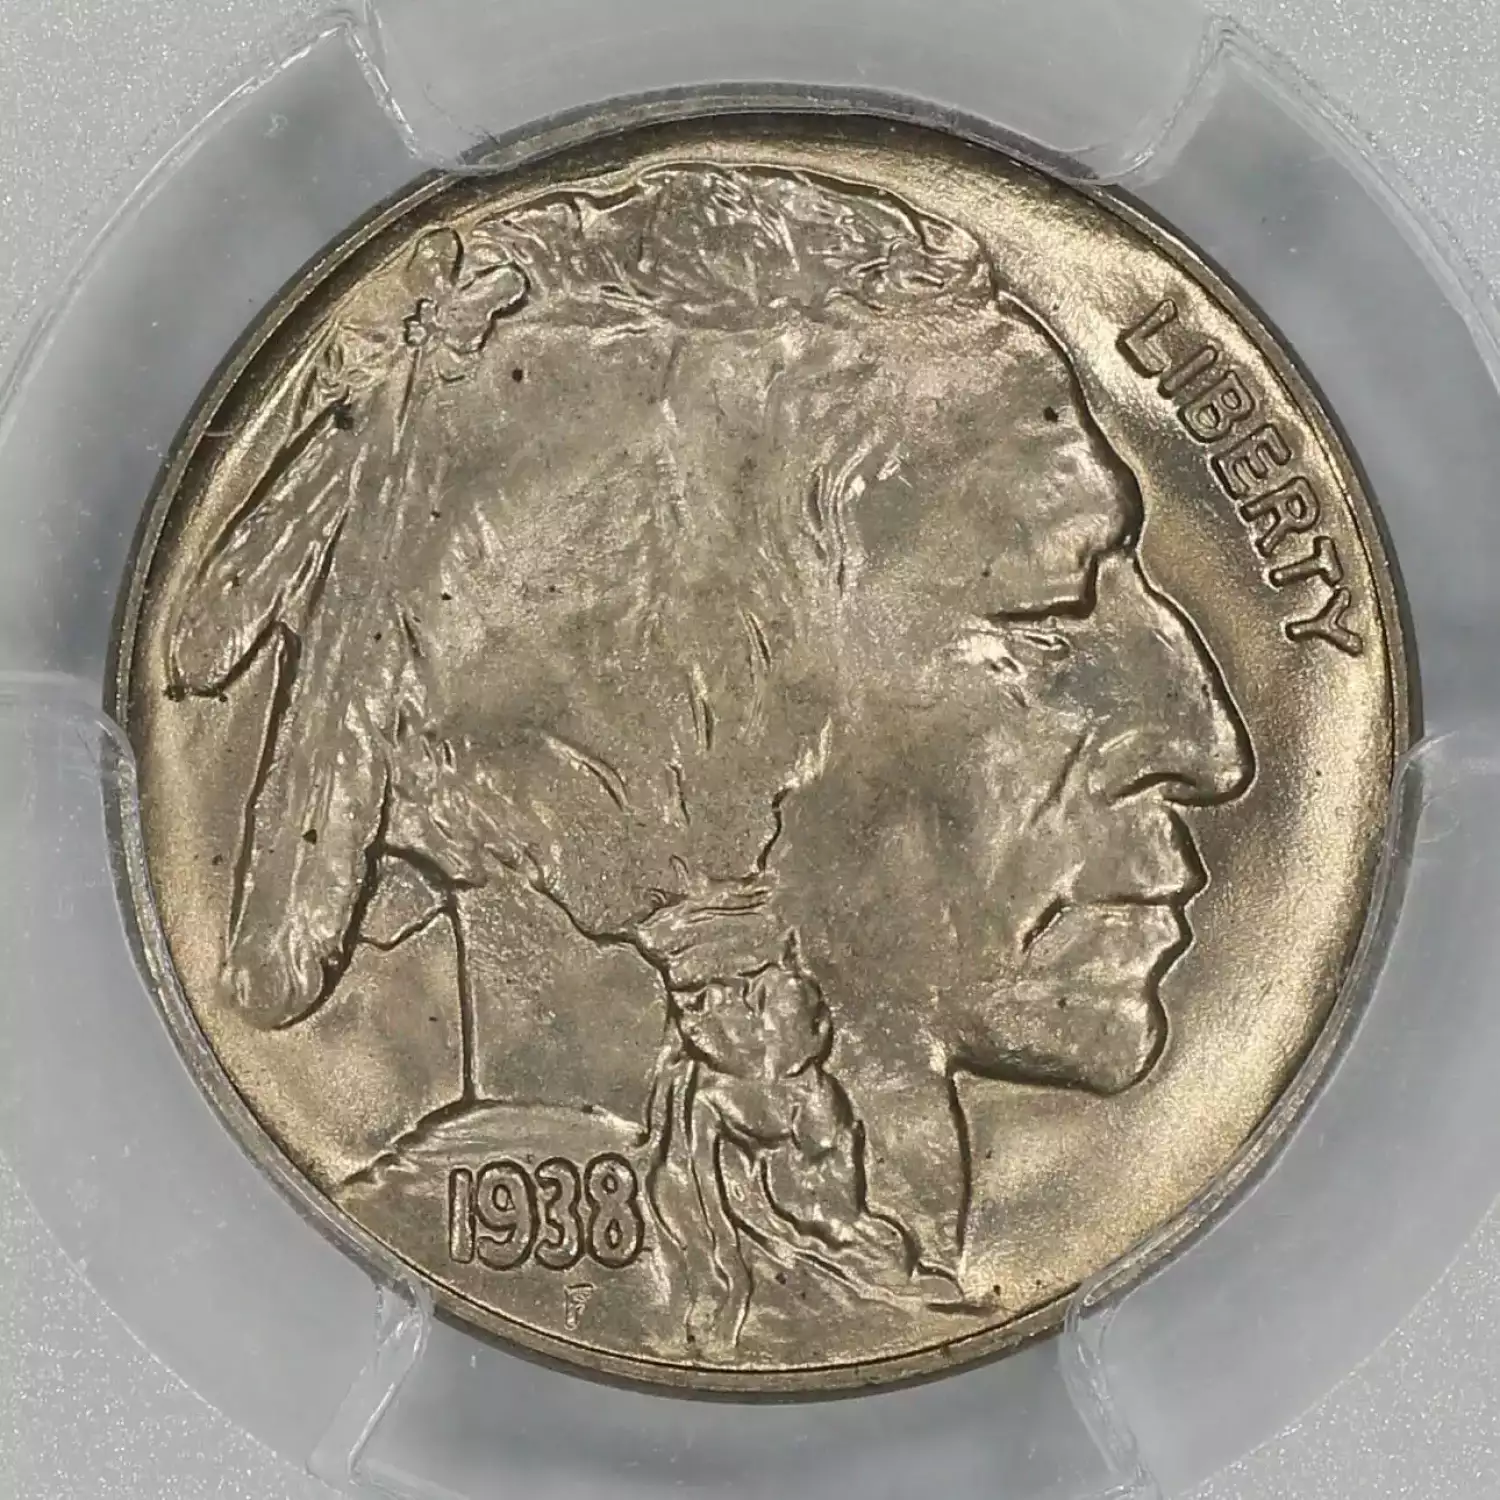 Nickel Five Cent Pieces-Indian Head or Buffalo